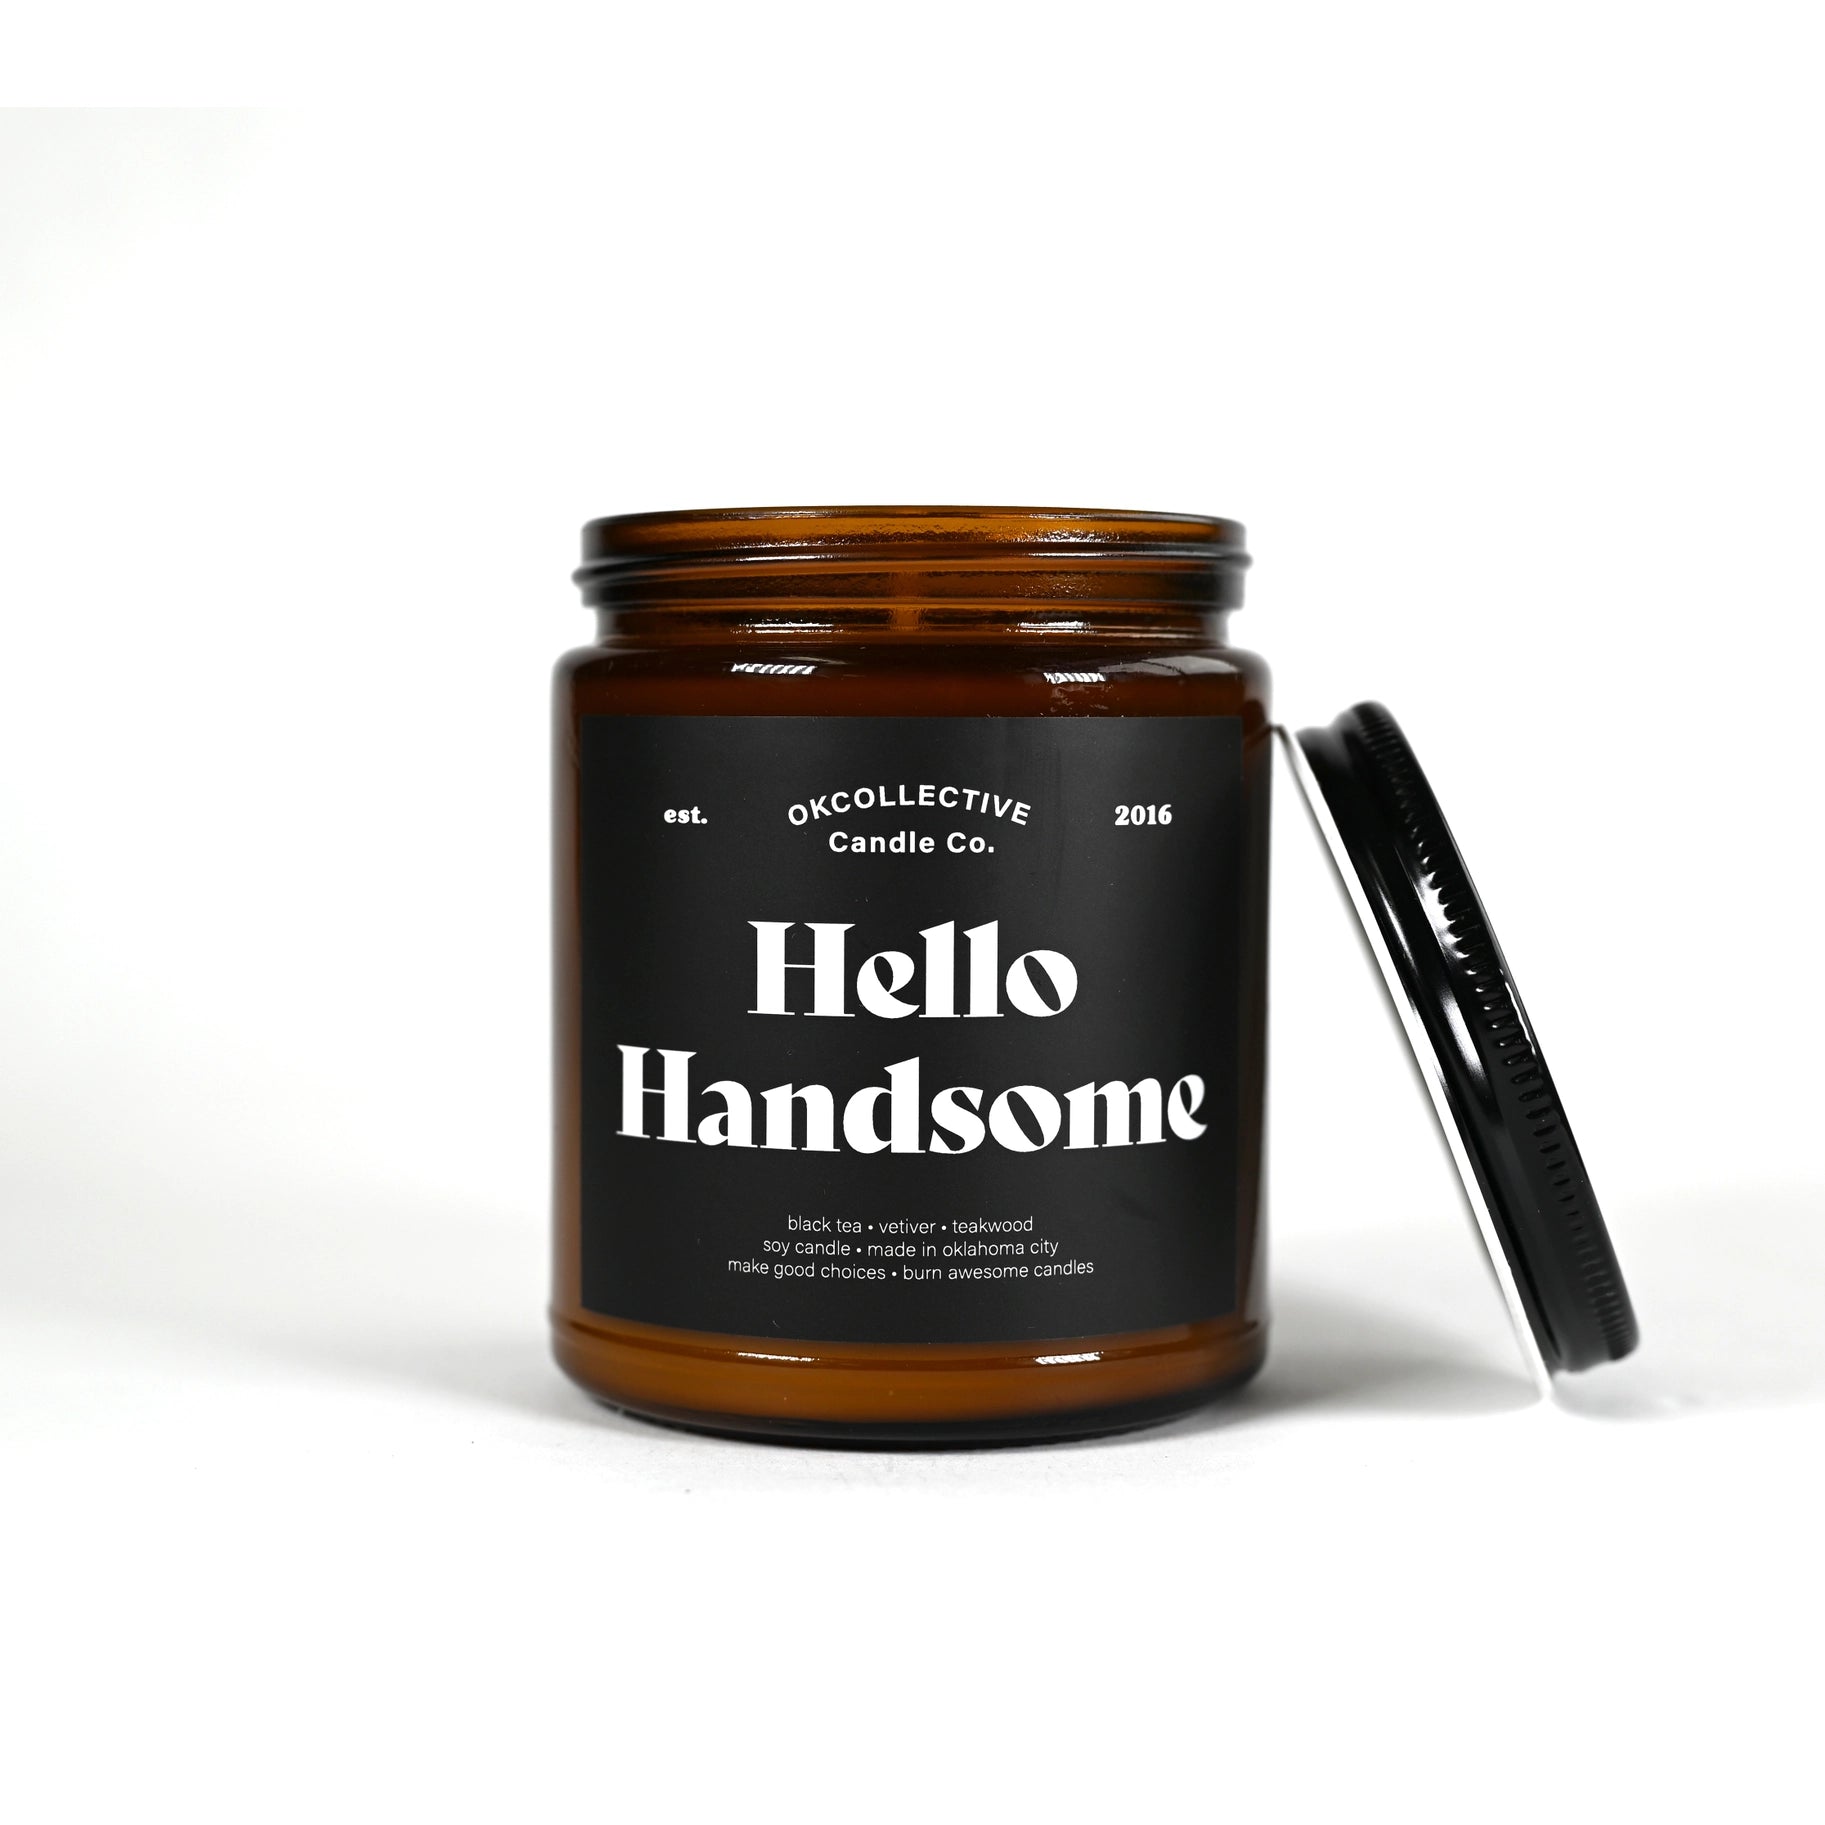 Hello Handsome Soy Candle